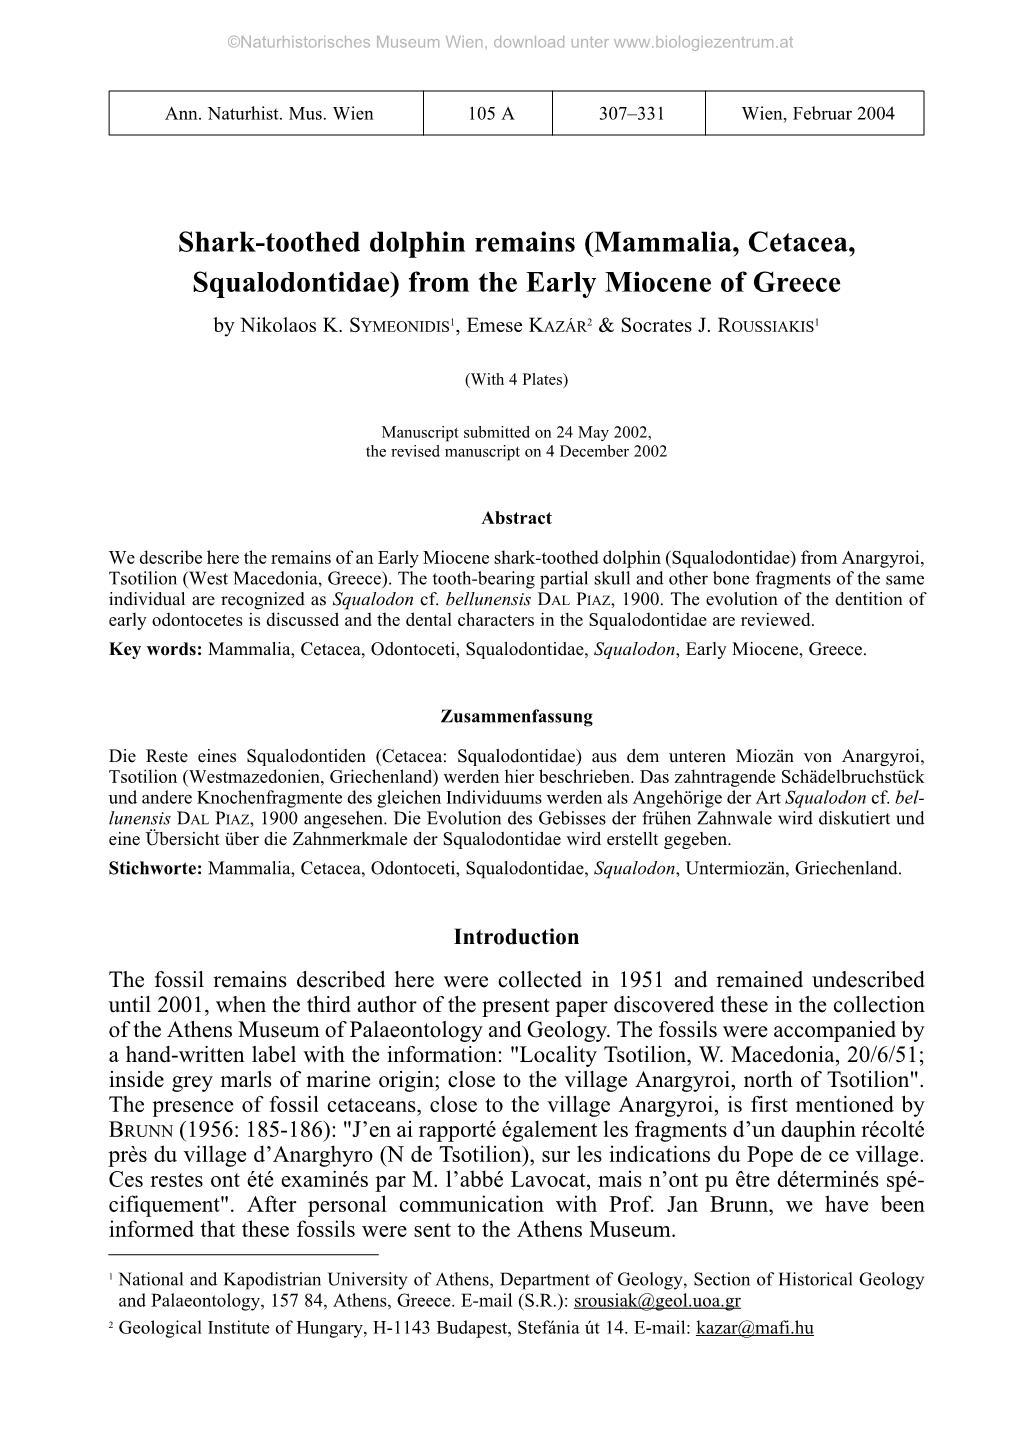 Shark-Toothed Dolphin Remains (Mammalia, Cetacea, Squalodontidae) from the Early Miocene of Greece